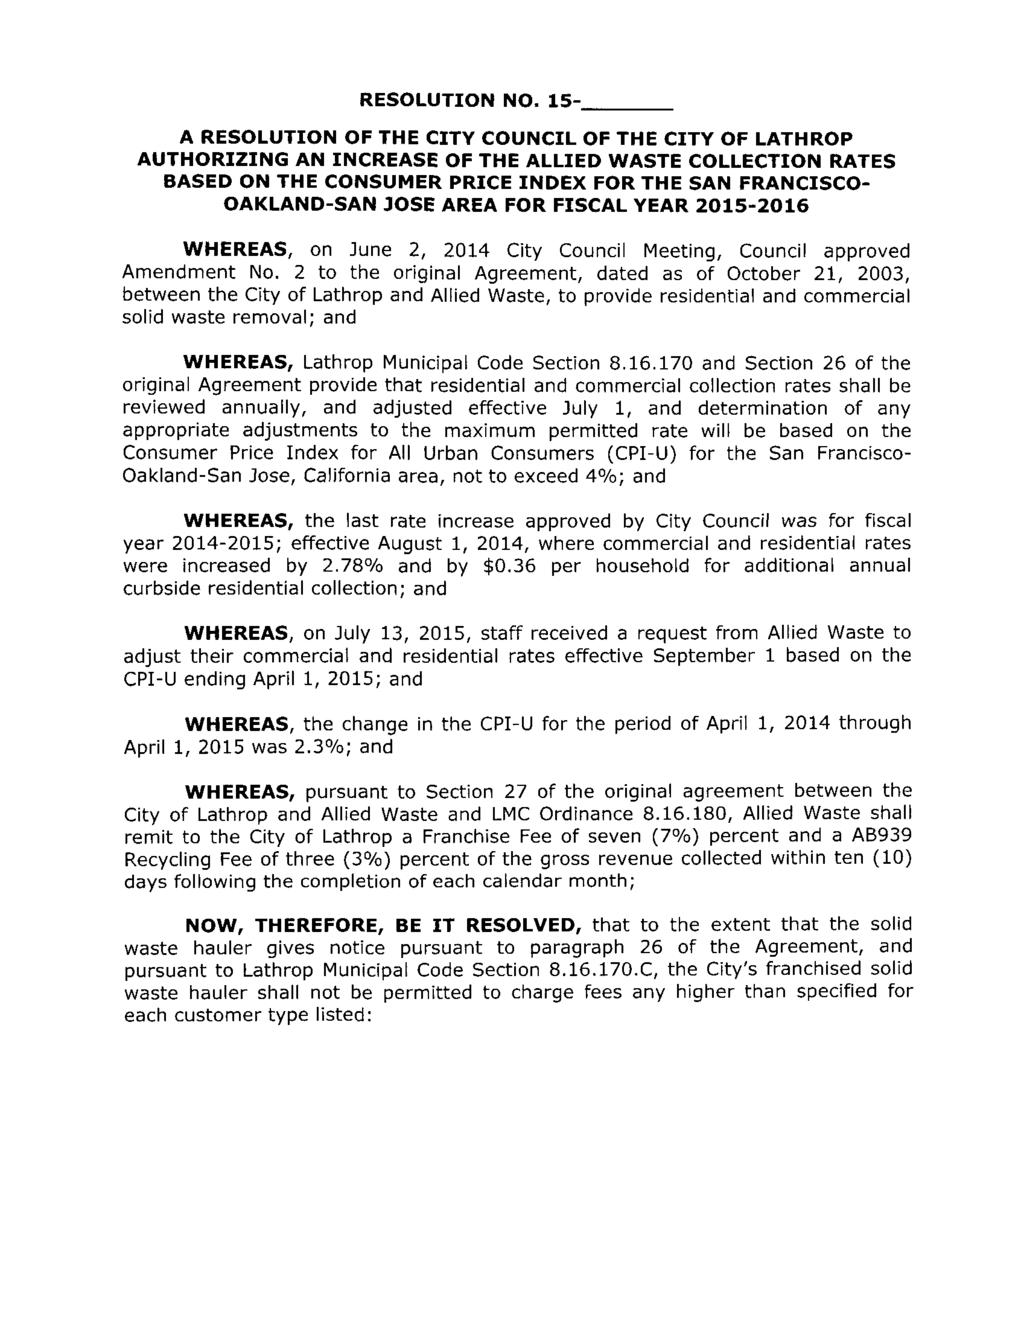 RESOLUTION NO 15 A RESOLUTION OF THE CITY COUNCIL OF THE CITY OF LATHROP AUTHORIZING AN INCREASE OF THE ALLIED WASTE COLLECTION RATES BASED ON THE CONSUMER PRICE INDEX FOR THE SAN FRANCISCO OAKLAND